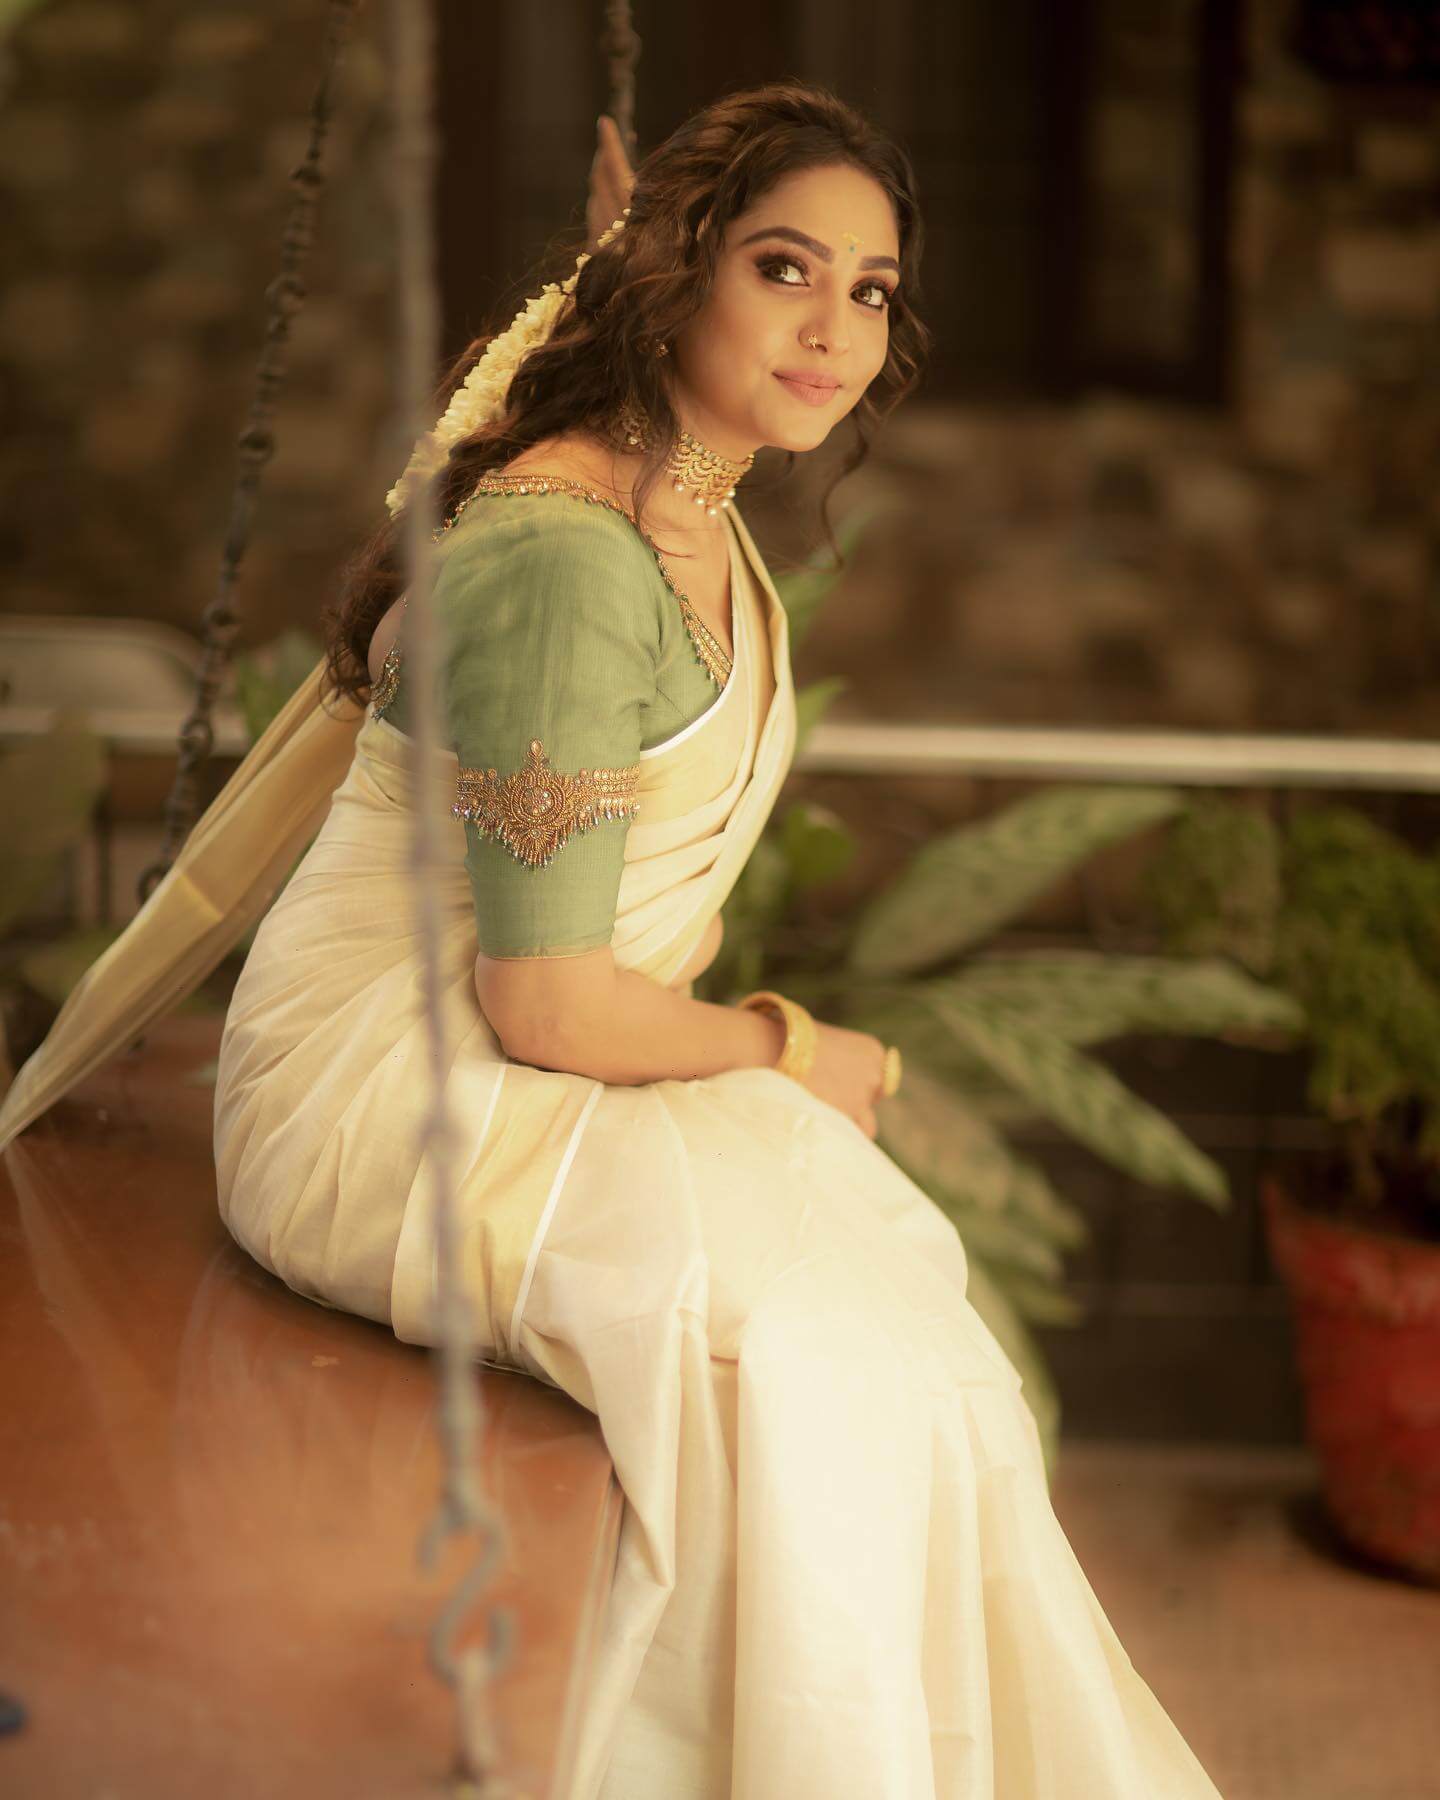  Smruthi Venkat Festive Ready Look In Traditional White Kasavu Saree With Light Green Blouse